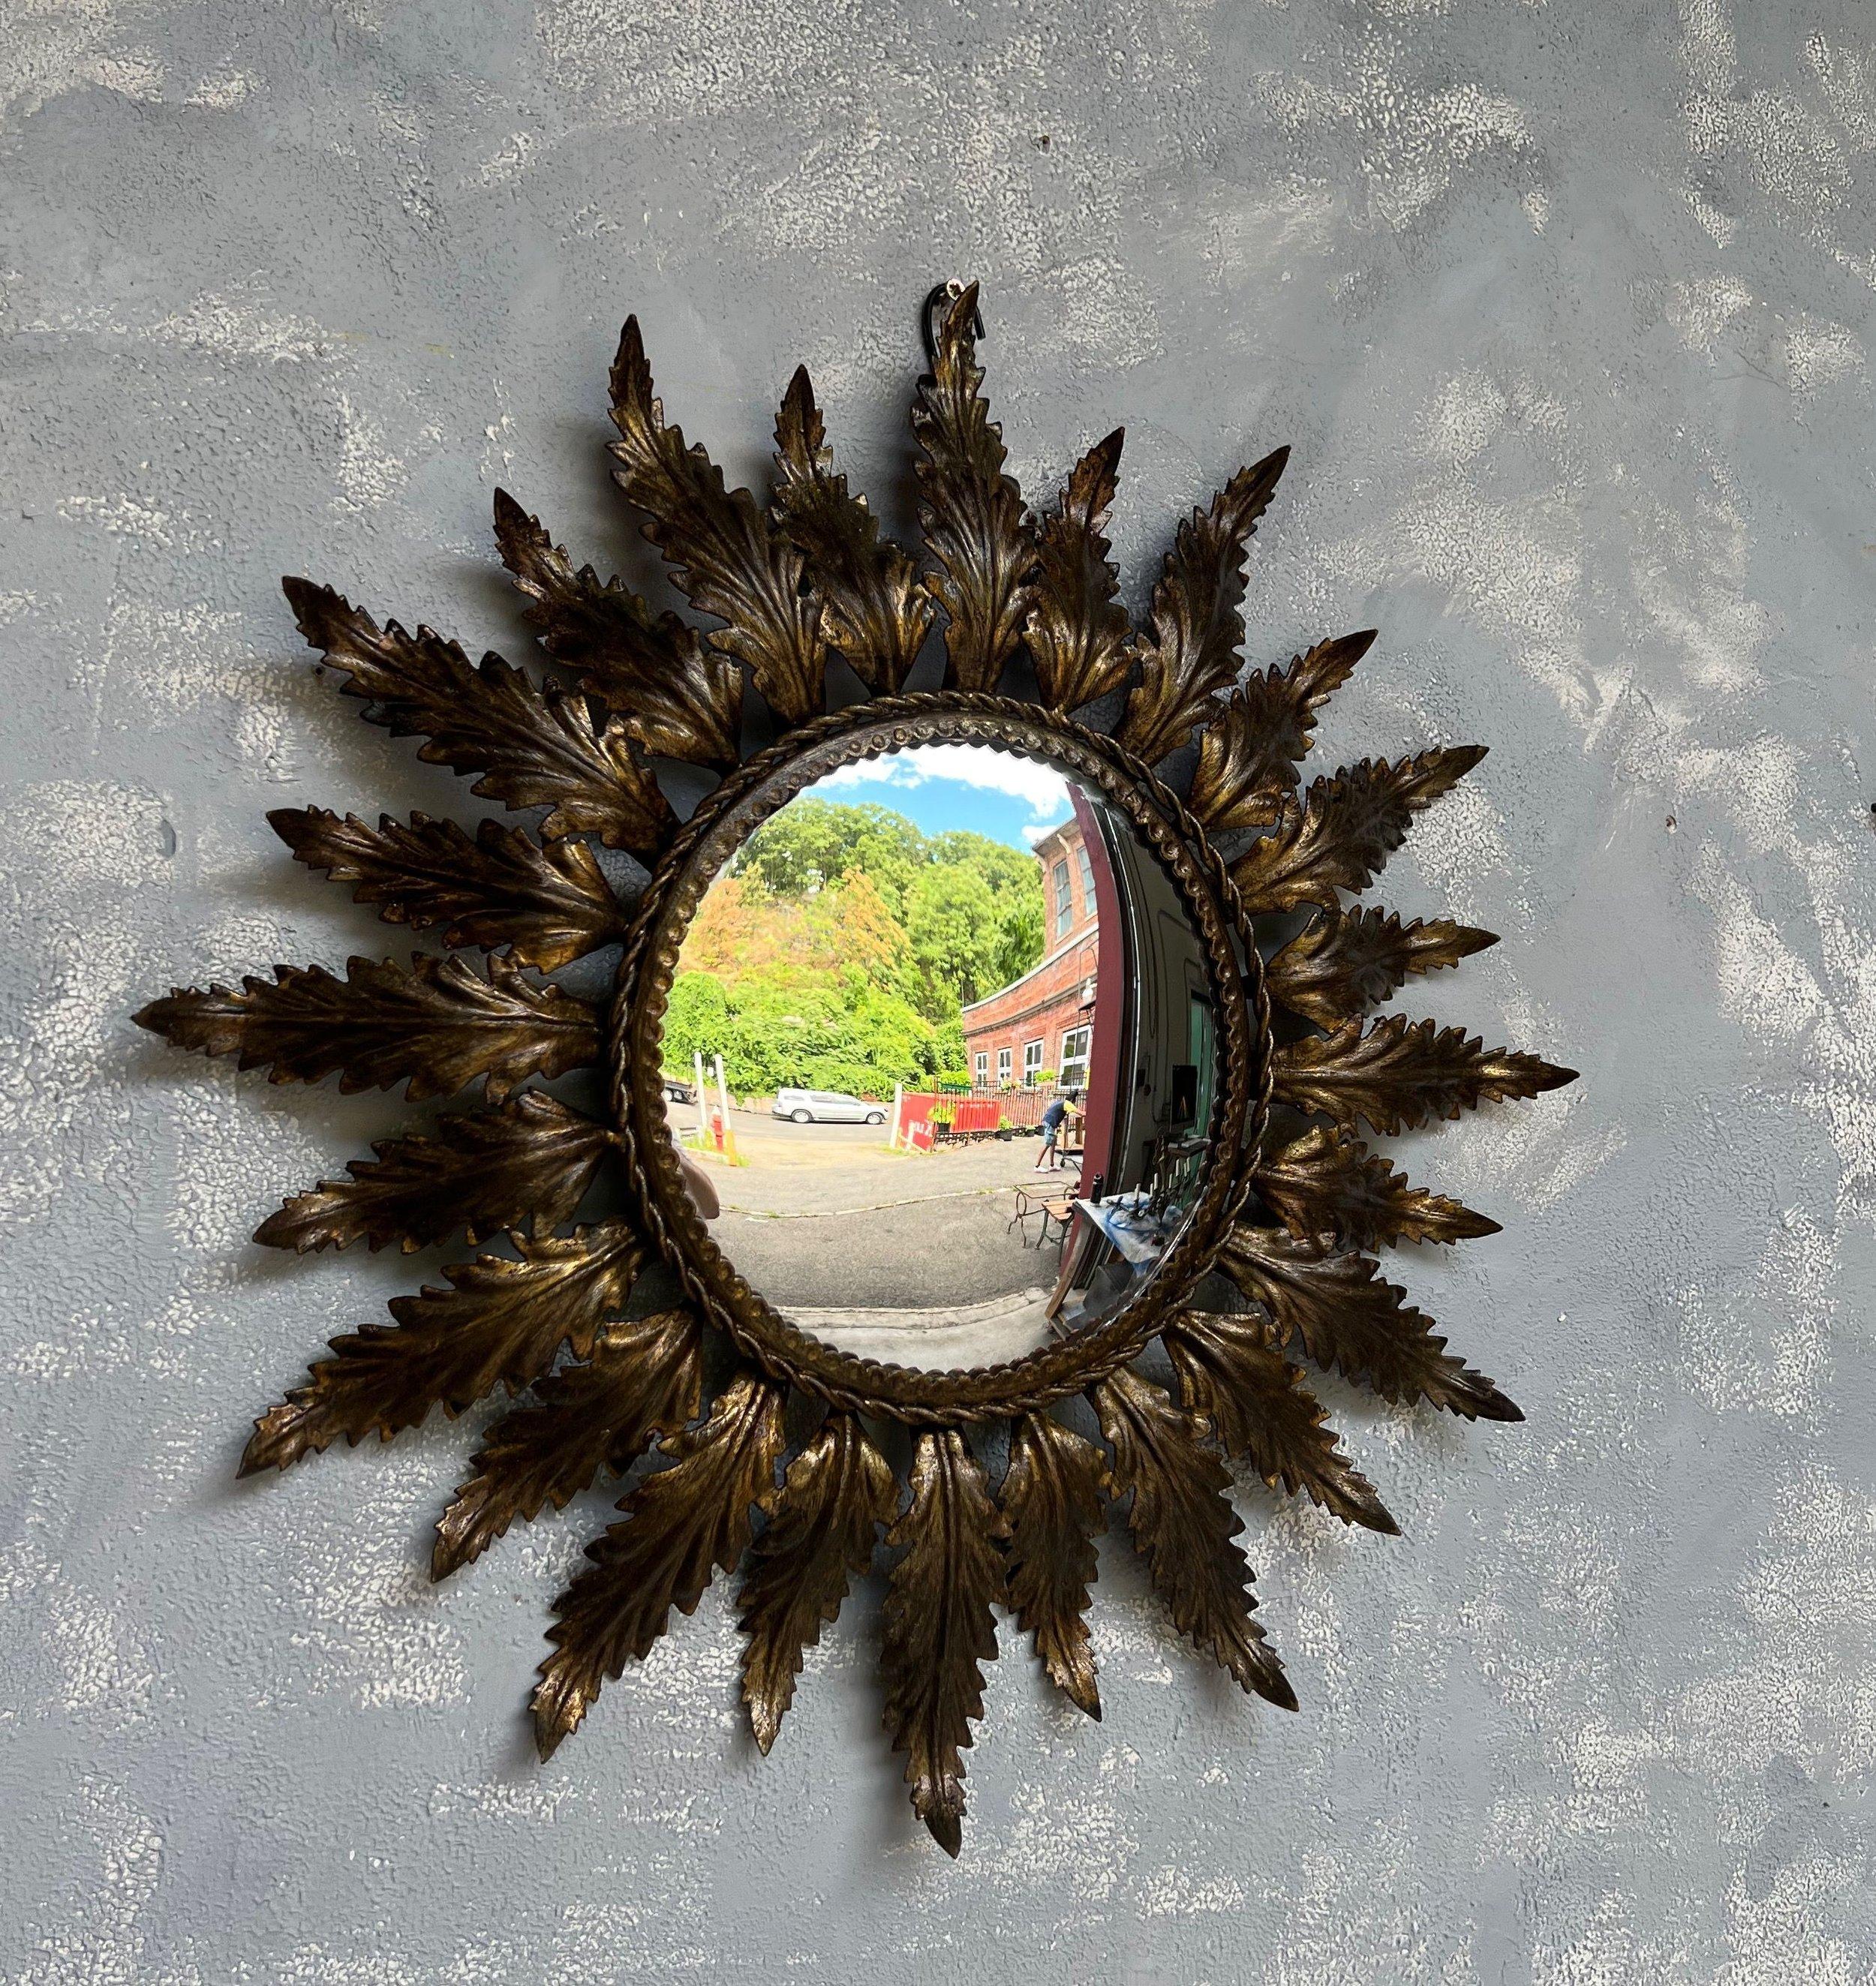 A small Spanish 1950s round gilt metal sunburst mirror. This mid-century round gilt metal sunburst mirror is a gem. It features radiating leaves surrounding a convex mirror with a braided frame, adding an element of dimensionality and complexity to